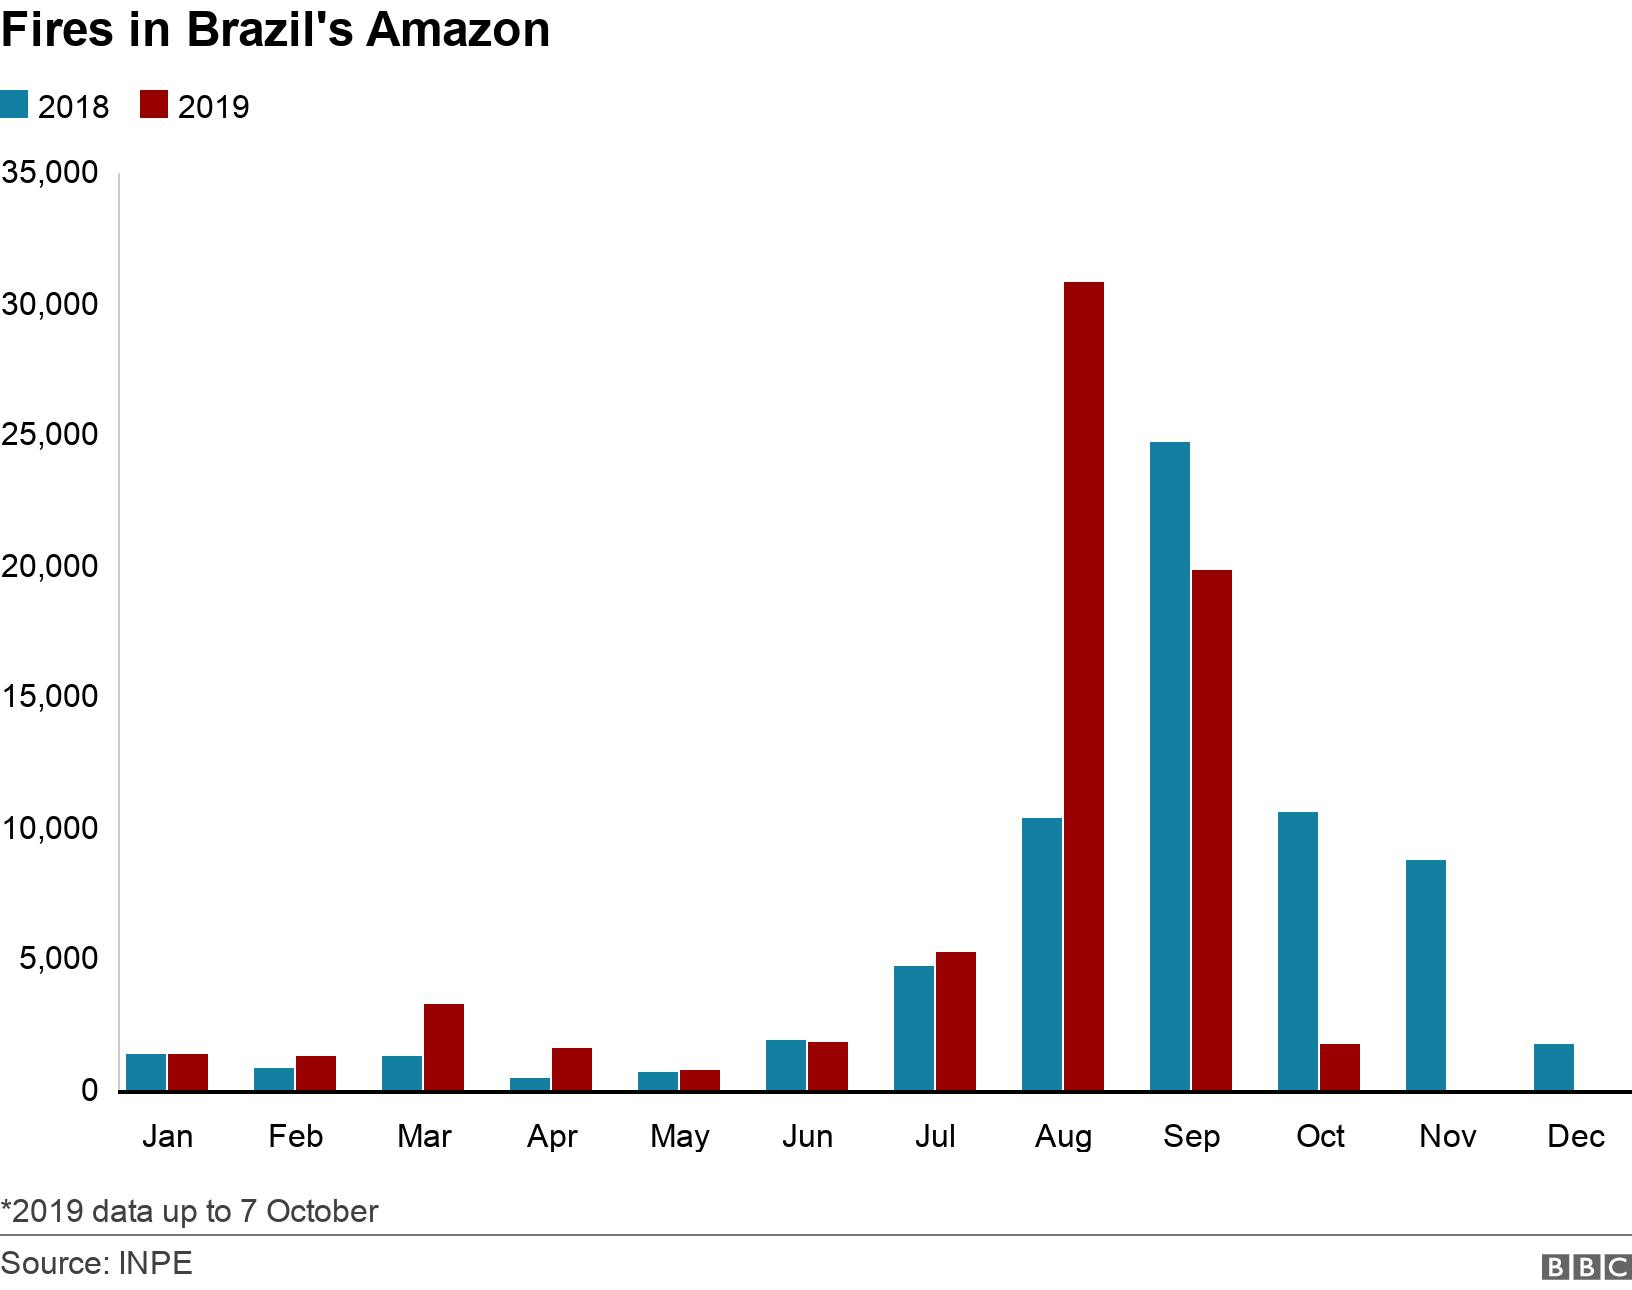 Fires in Brazil&#39;s Amazon. . Bar chart showing number of fires in Amazon in 2018 and 2019 *2019 data up to 7 October.